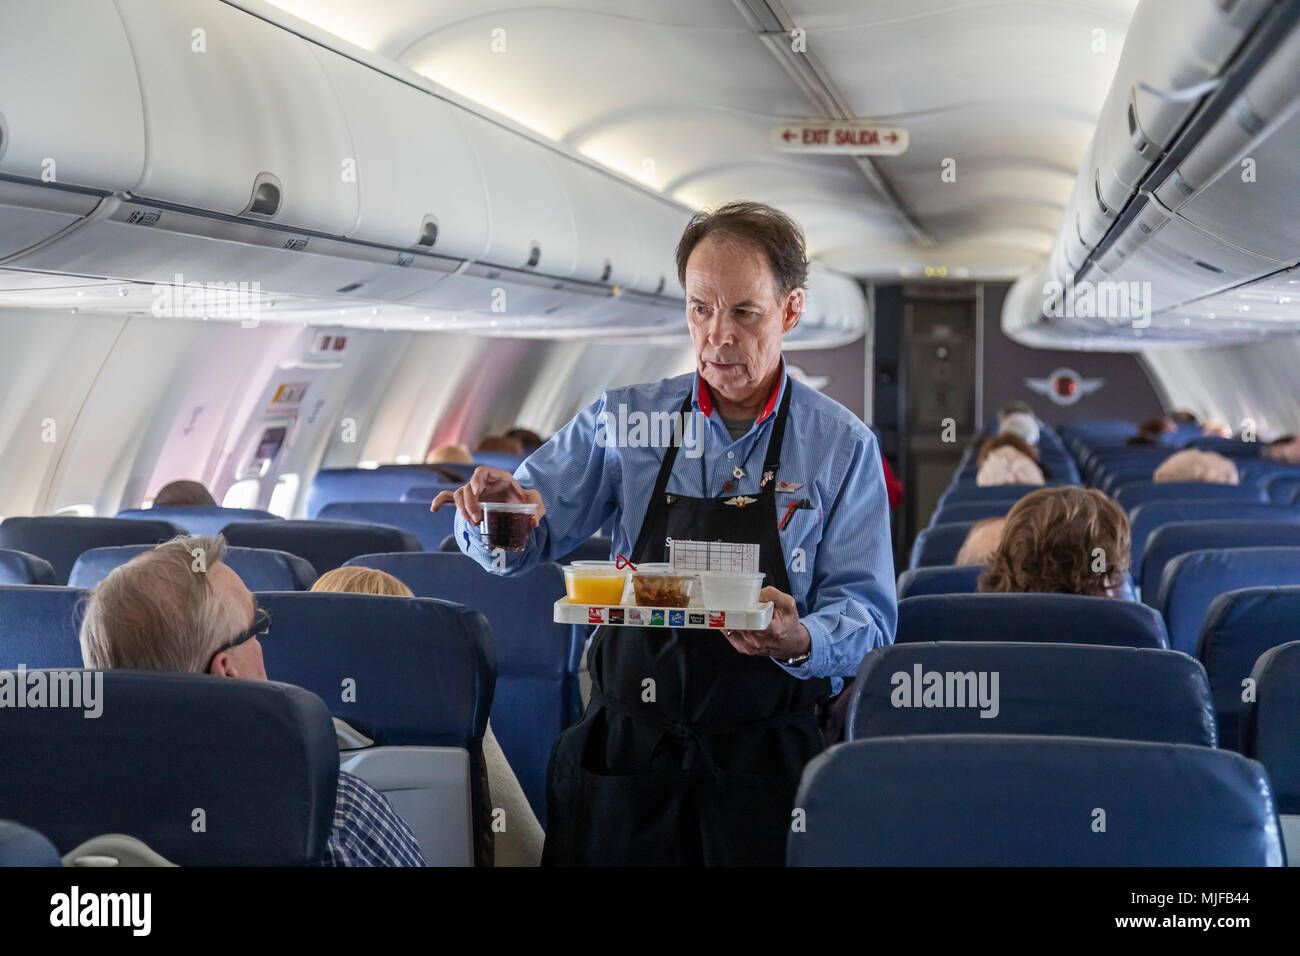 Detroit, Michigan - A flight attendant serves drinks on a Southwest Airlines flight from Detroit to Atlanta. Stock Photo